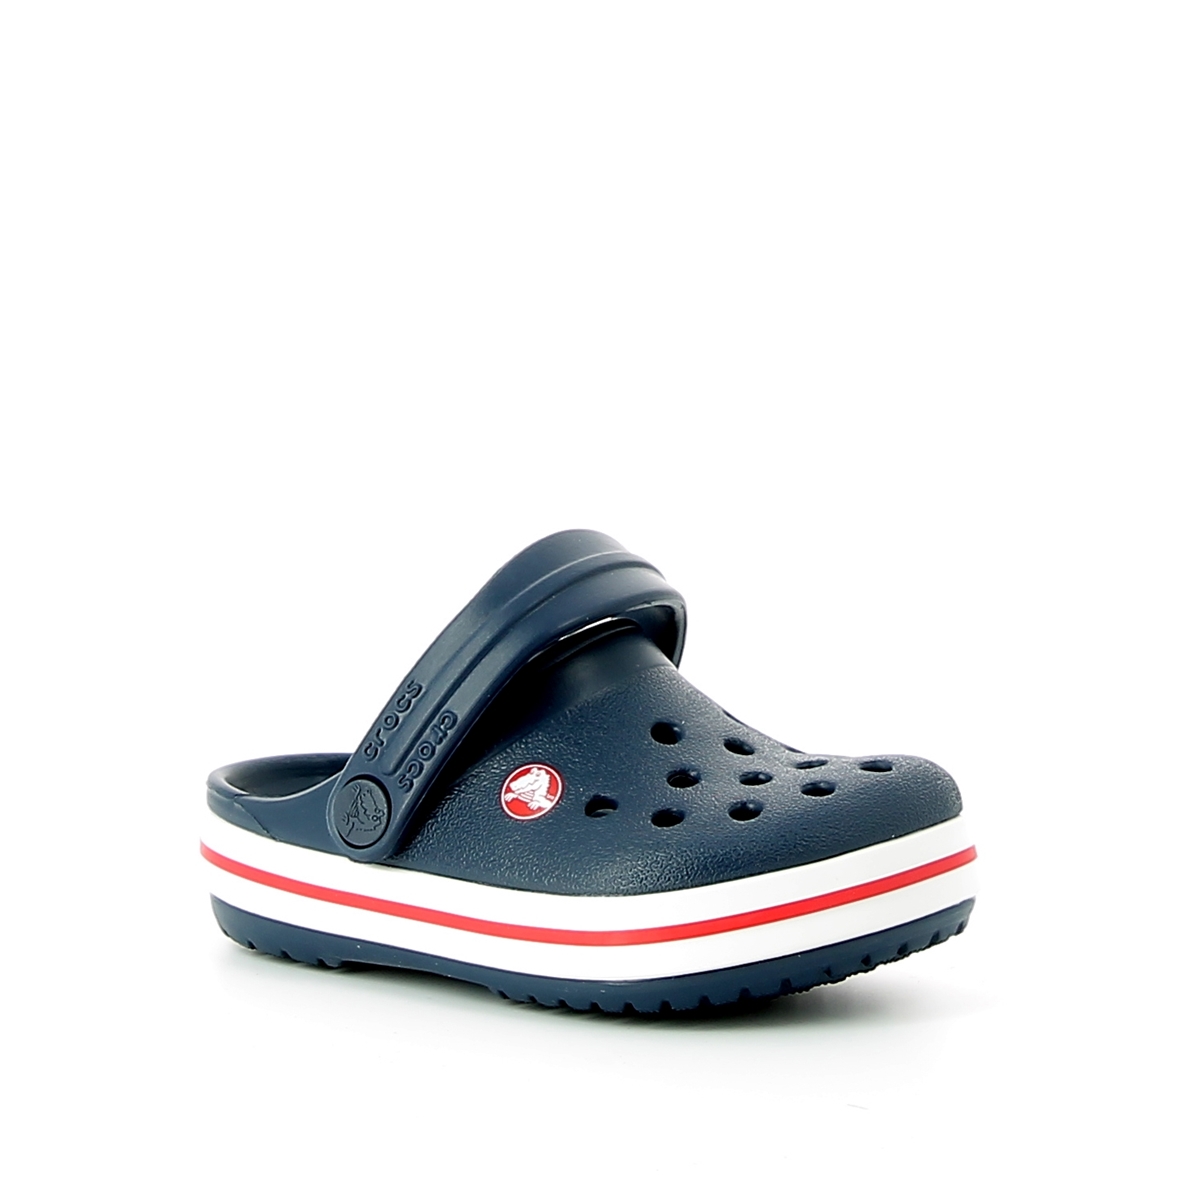 Crocs - Tongs et Plage - Bleu - Delcambe Chaussures - G0292A